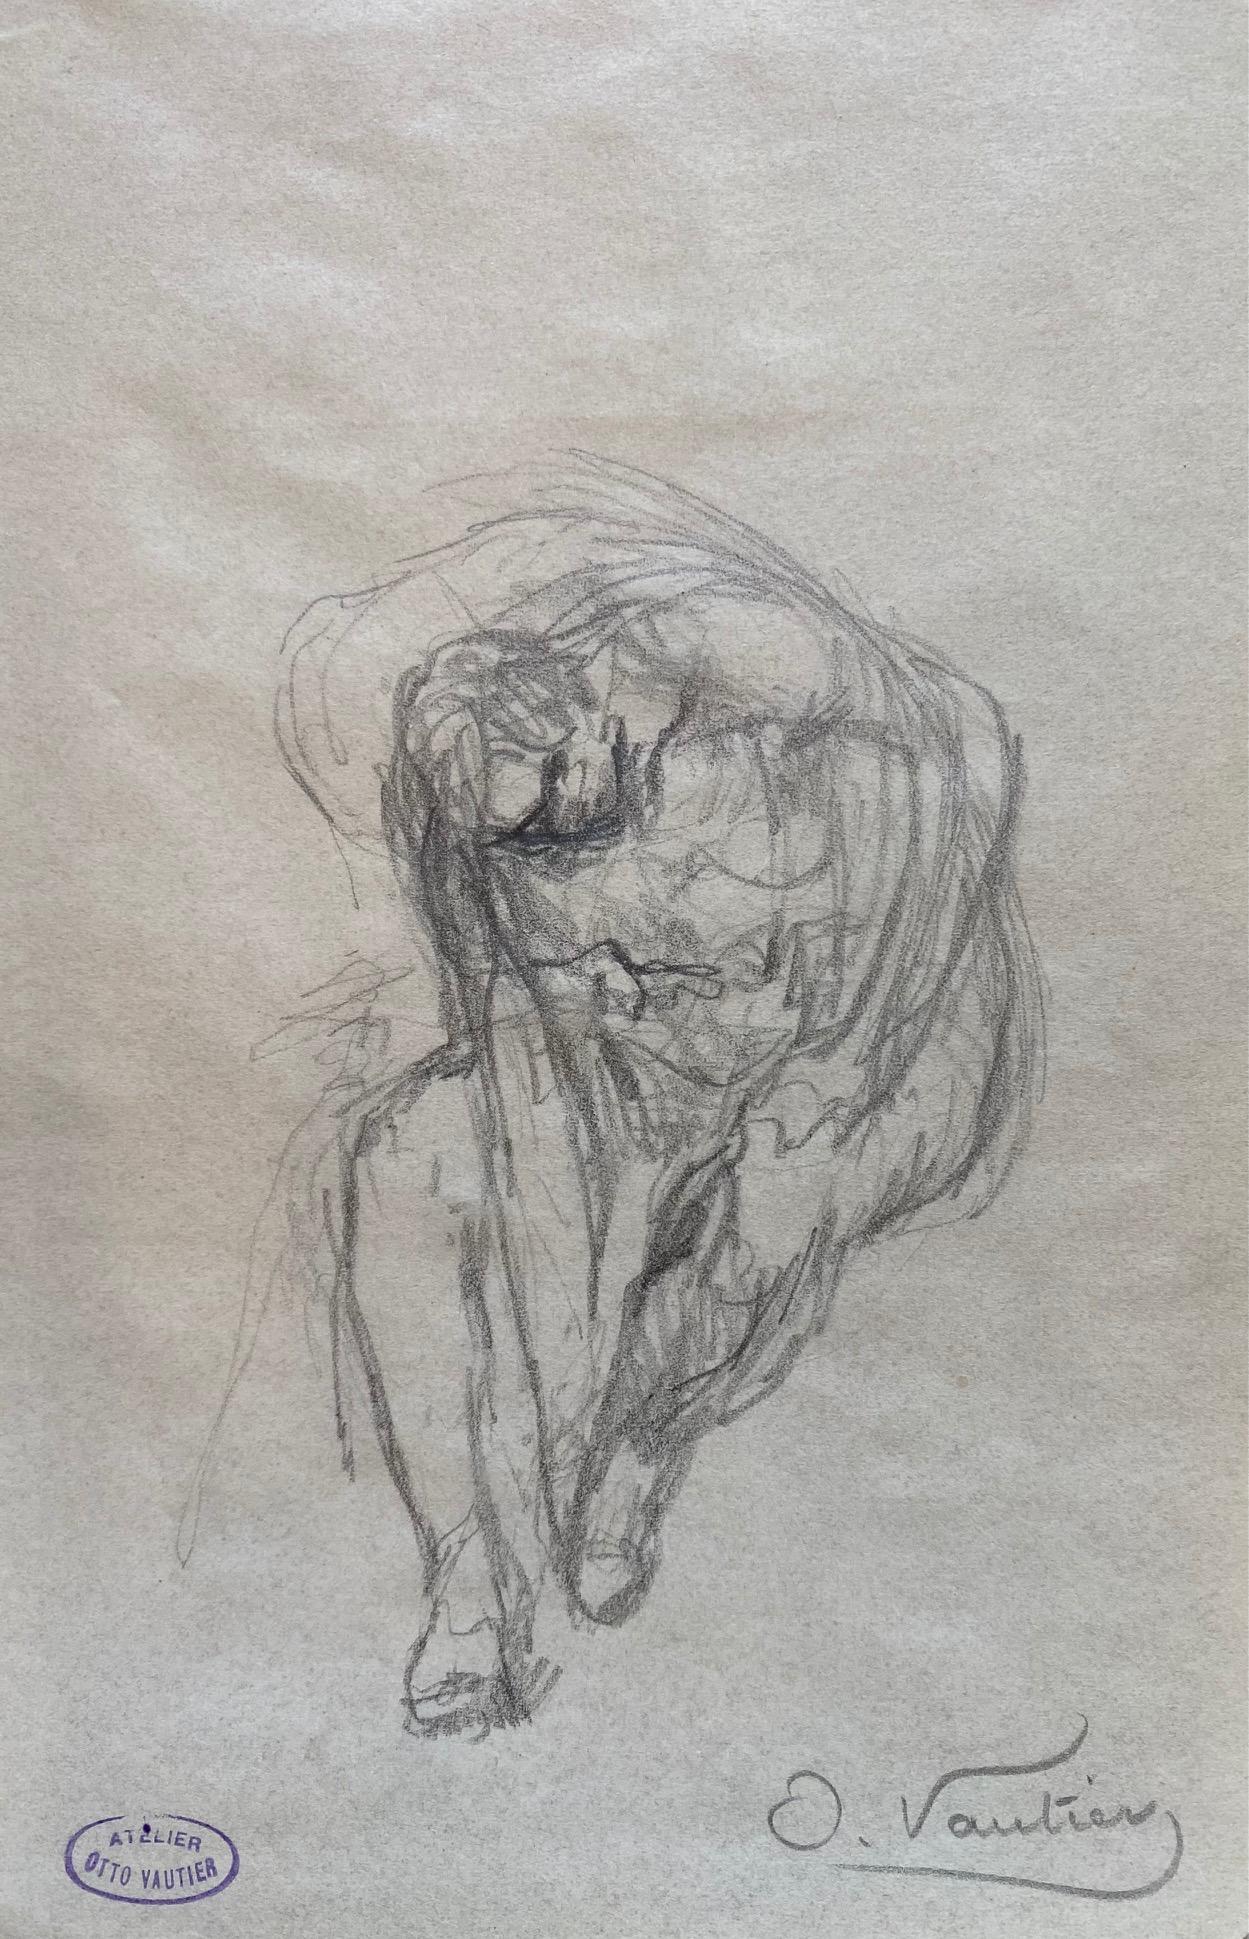 "Dressing" by Otto Vautier - Pencil on paper 19x12 cm